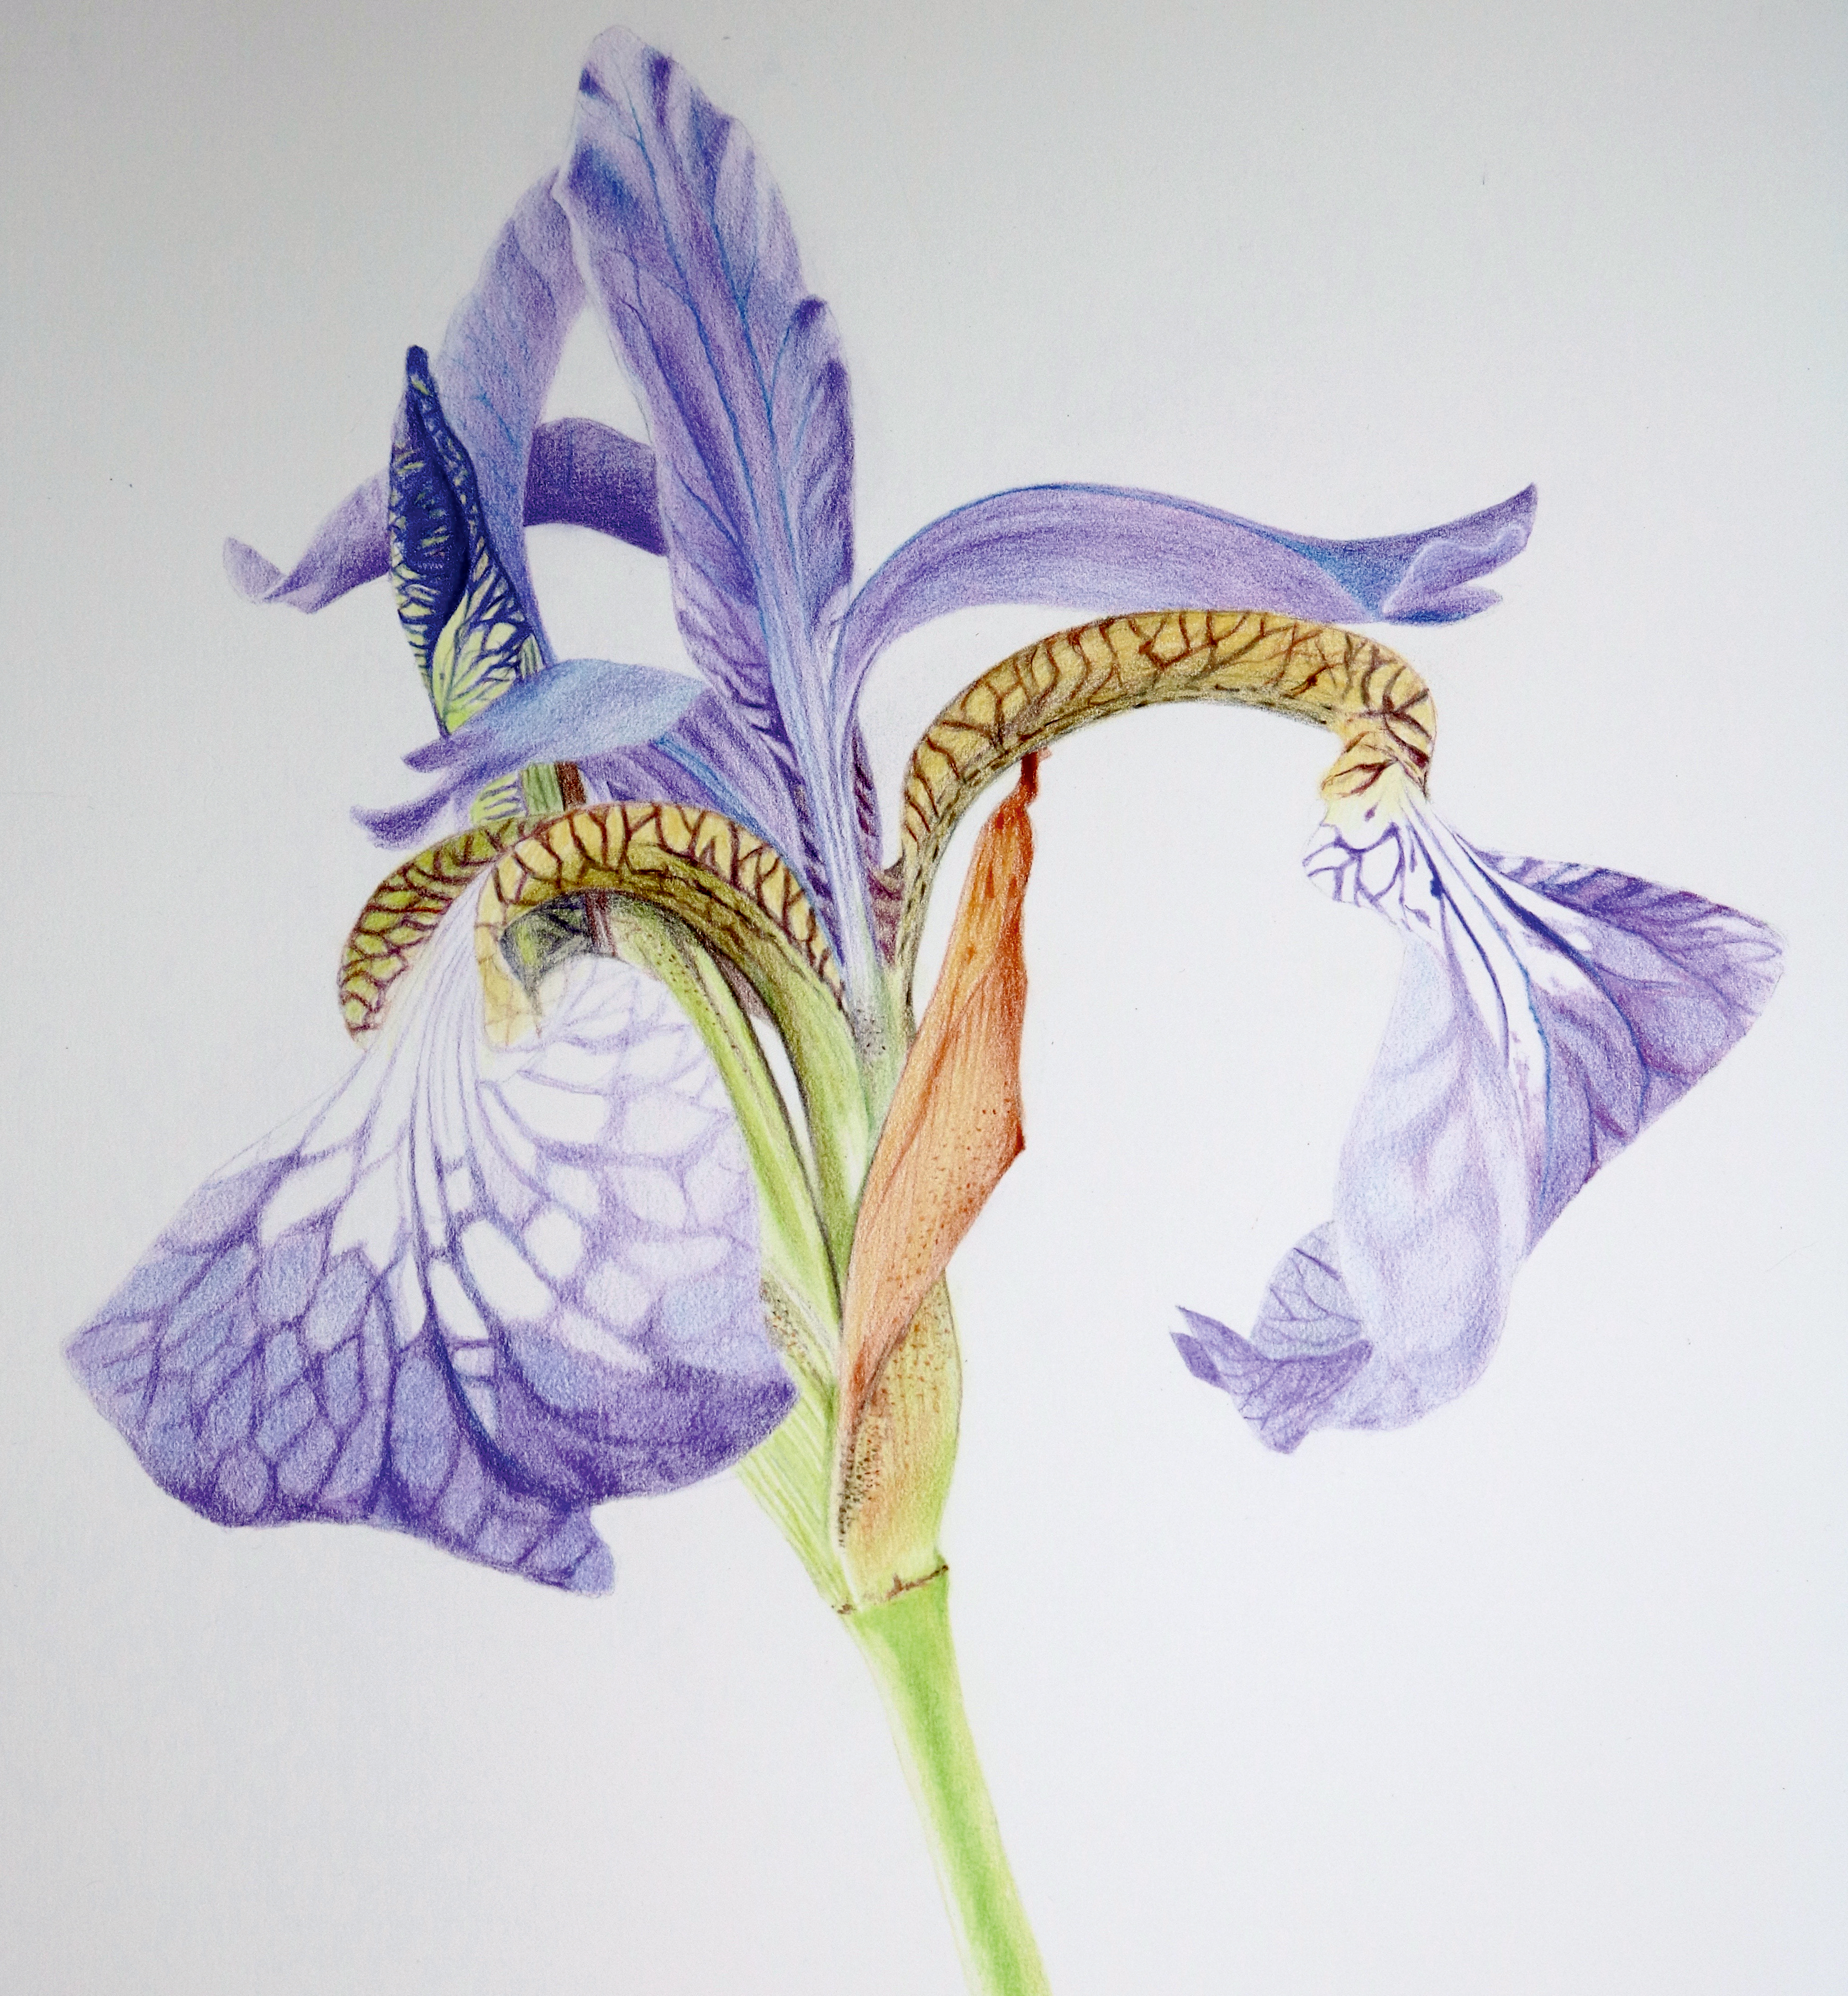 Dave Brasgalla layered up his pencil marks to create this delicate iris